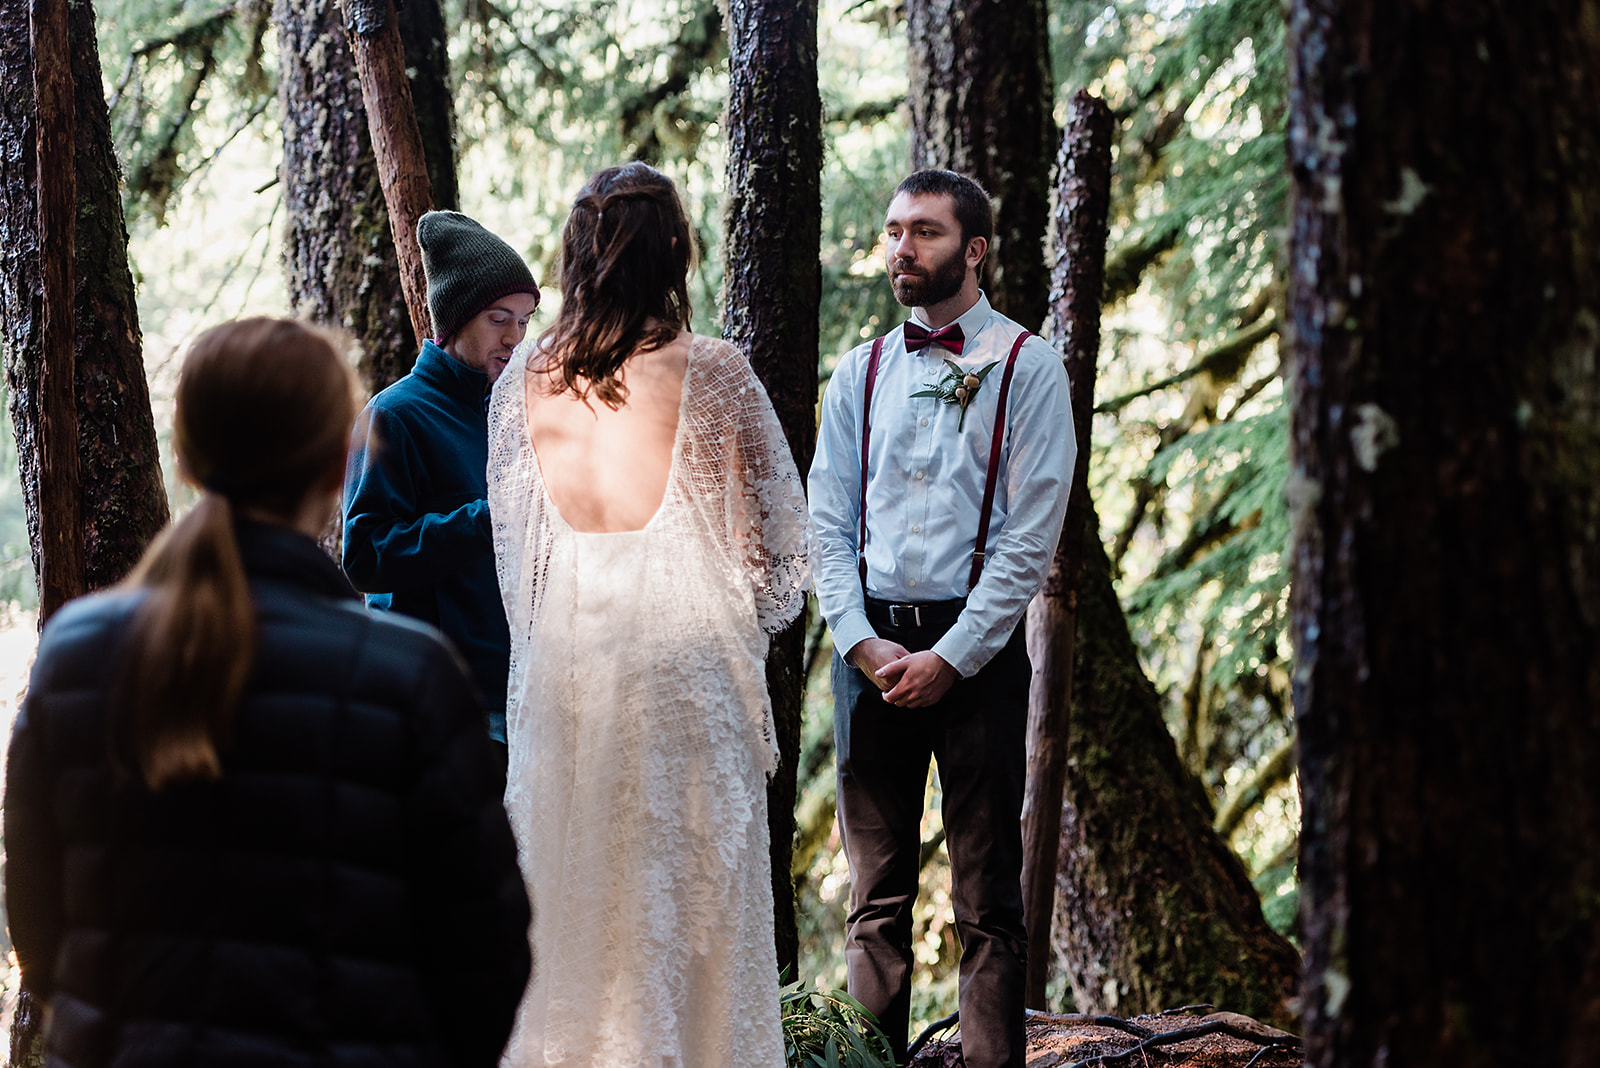 This is a picture taken during an elopement ceremony. It is the bride and groom and their loved ones.